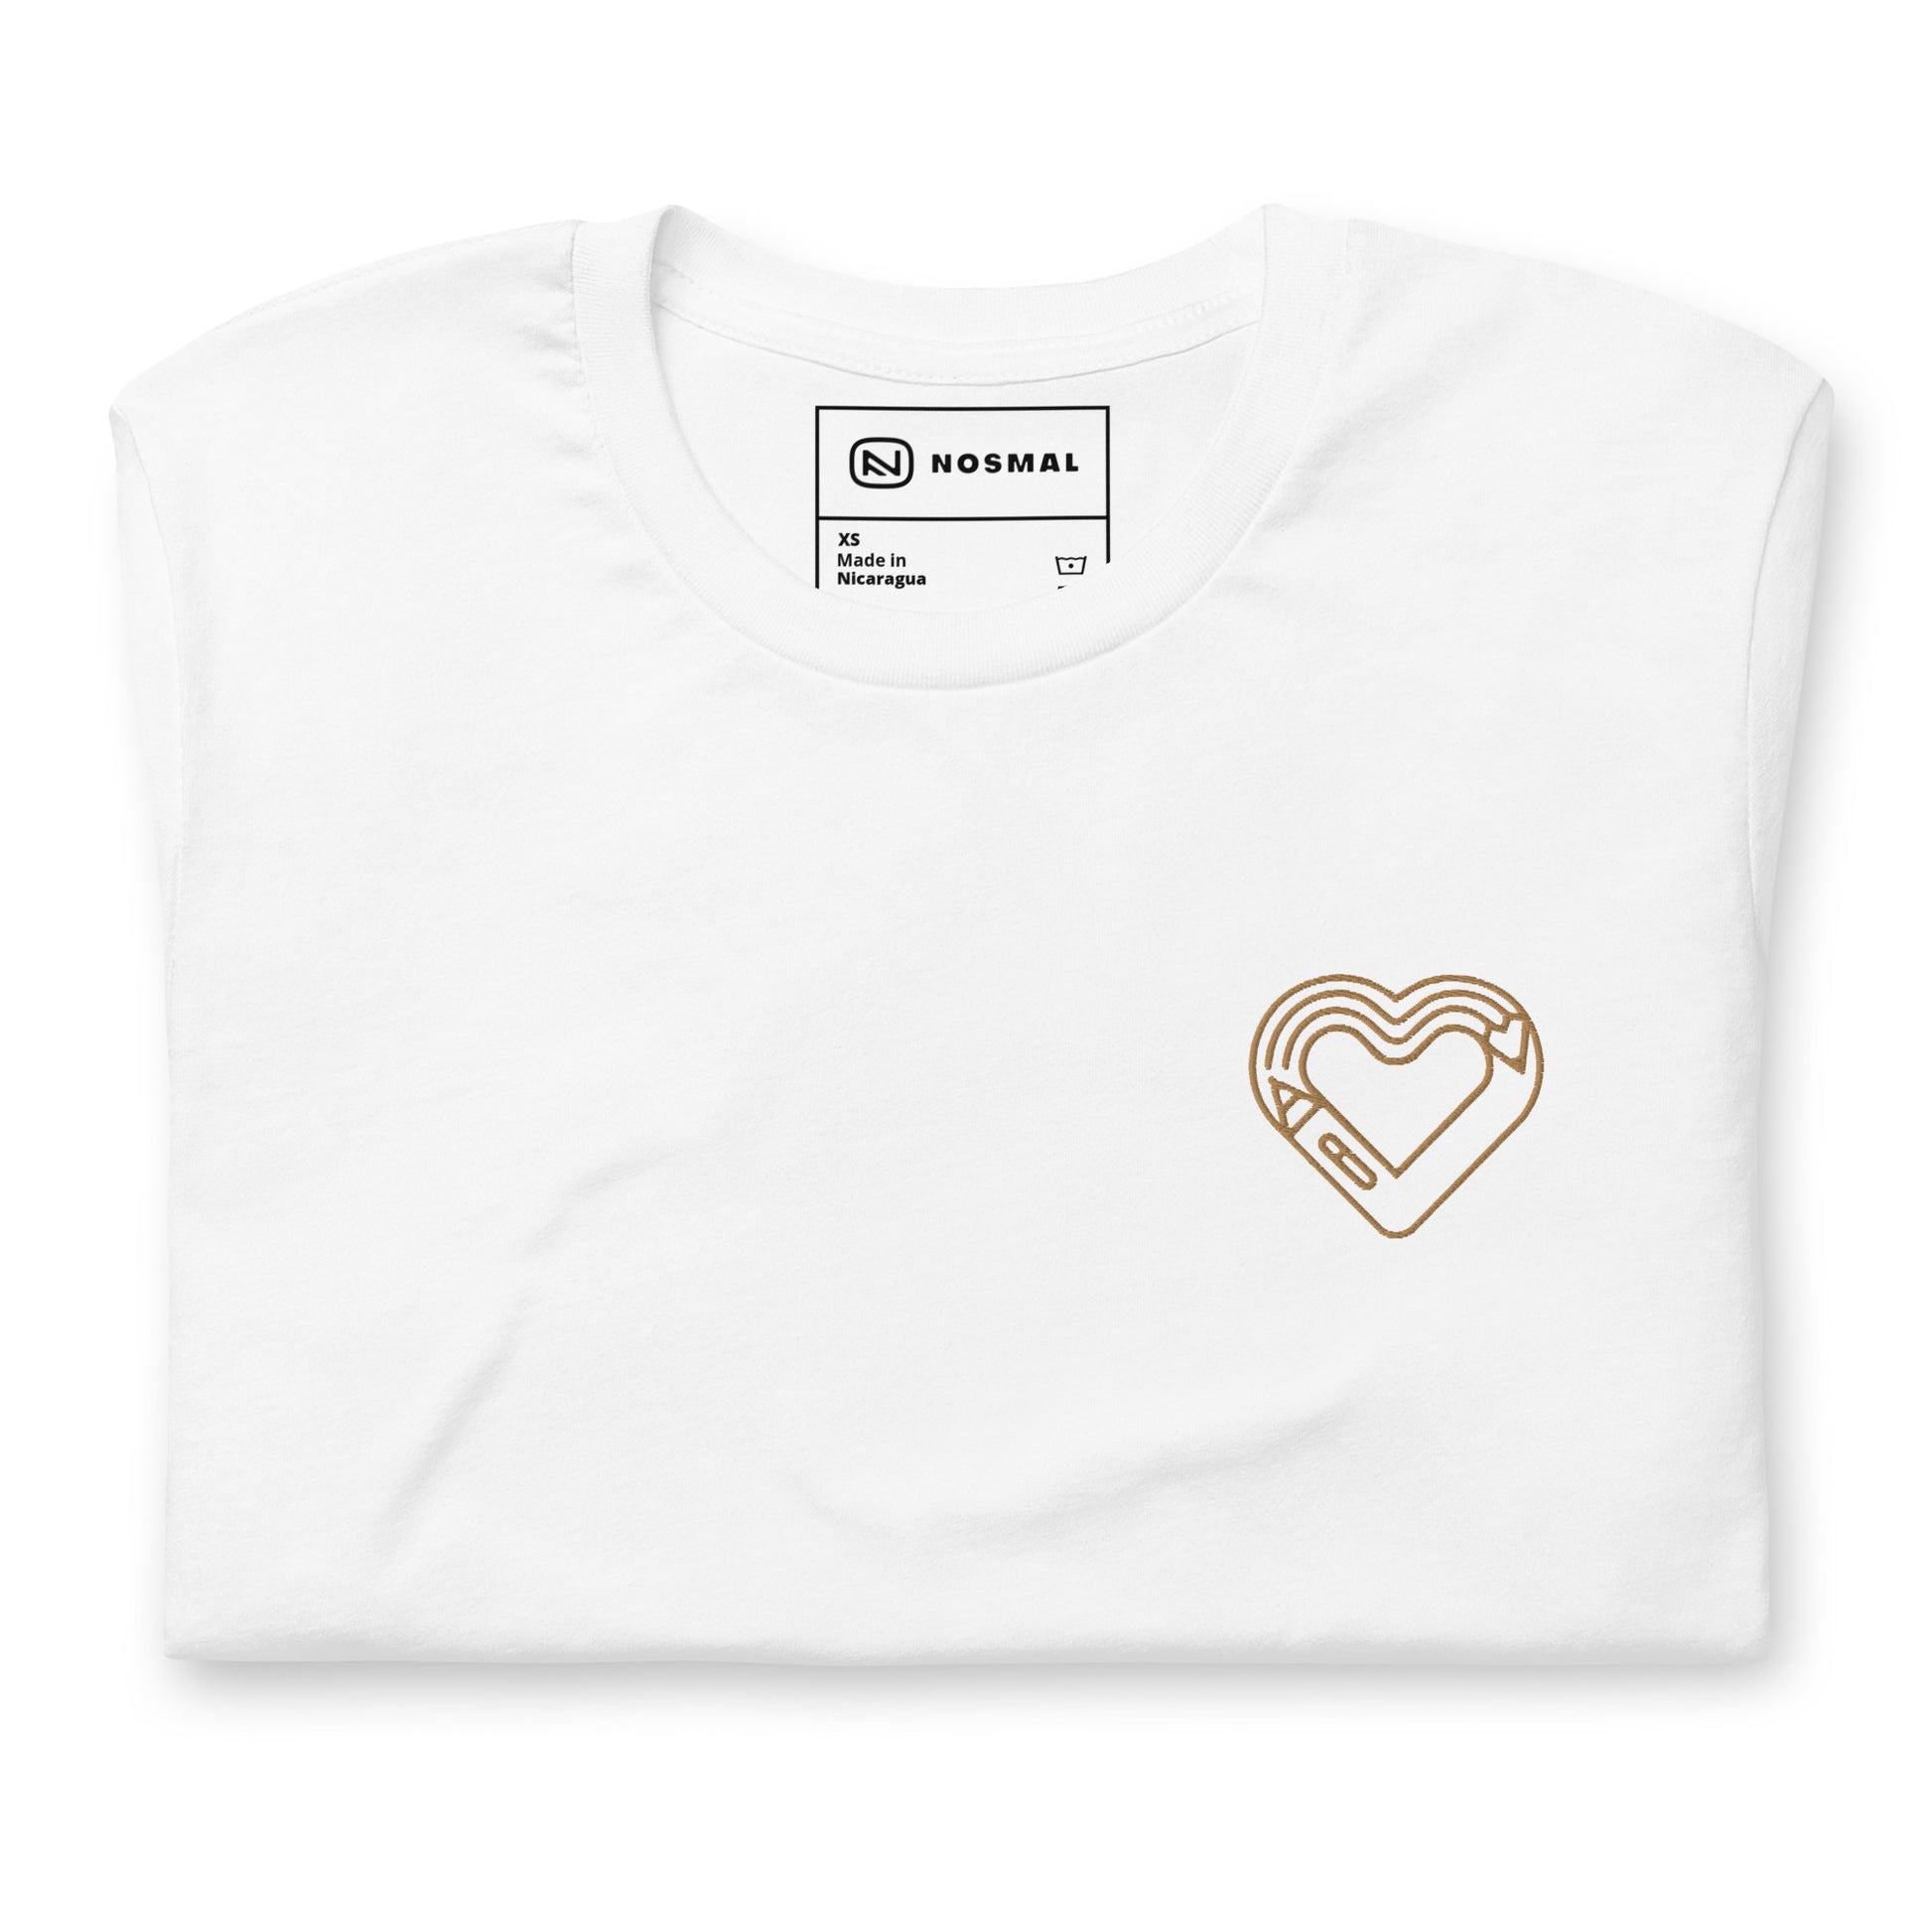 Top down view of maker's heart I gold embroidered design on white unisex t-shirt.